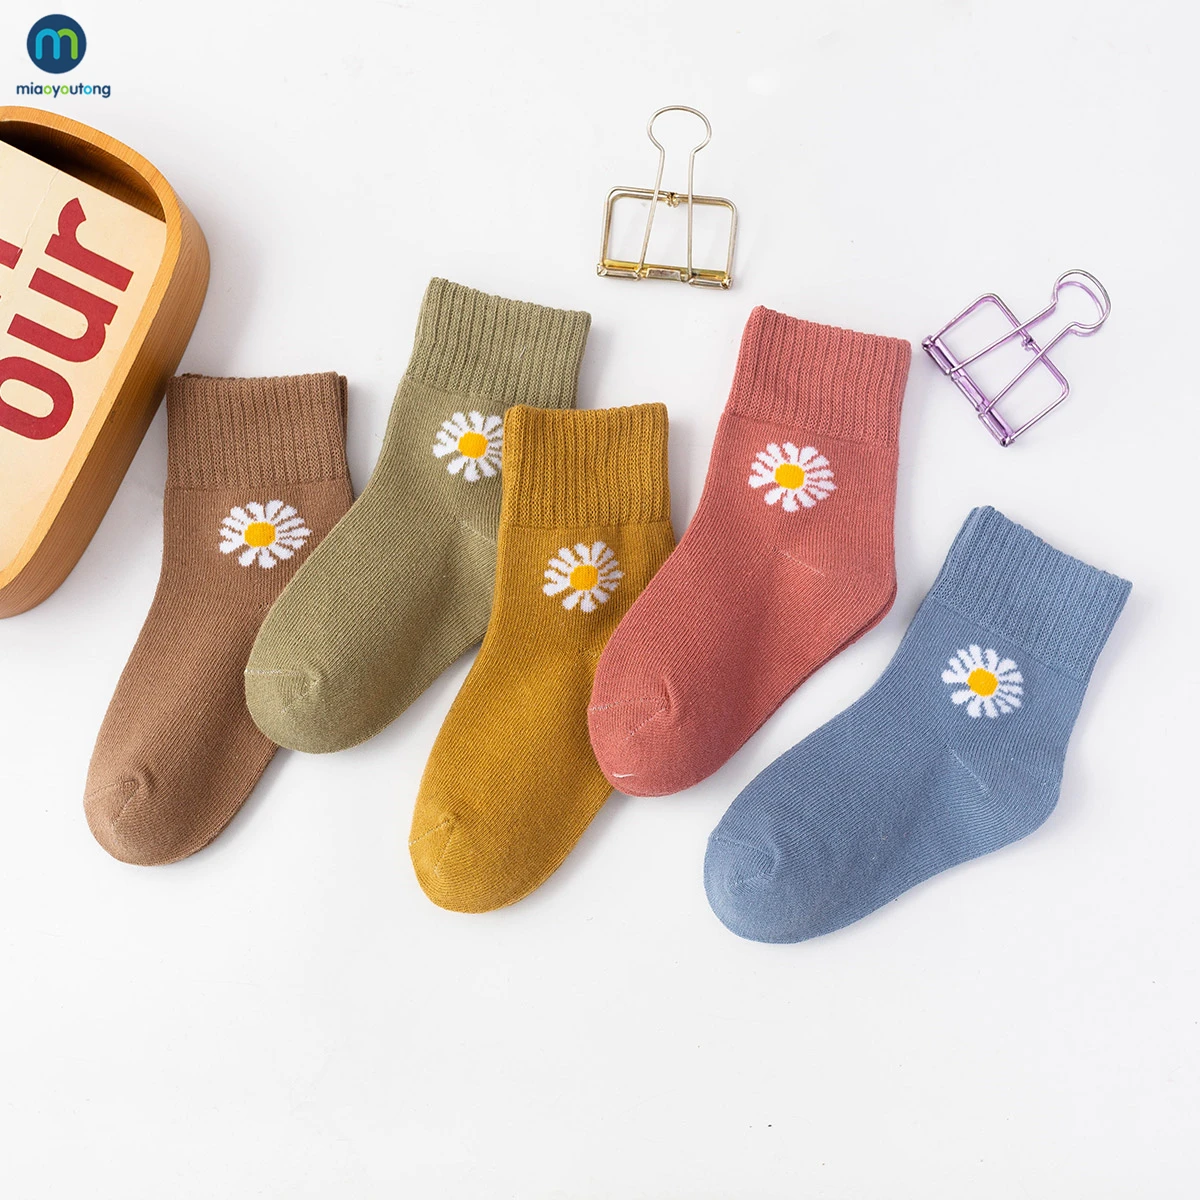 

5 Pairs/Lot Children's Socks Cute Daisy Flowers Kids Cotton Socks Baby Girl Socks For 1-12 Years Autumn And Winter Miaoyoutong